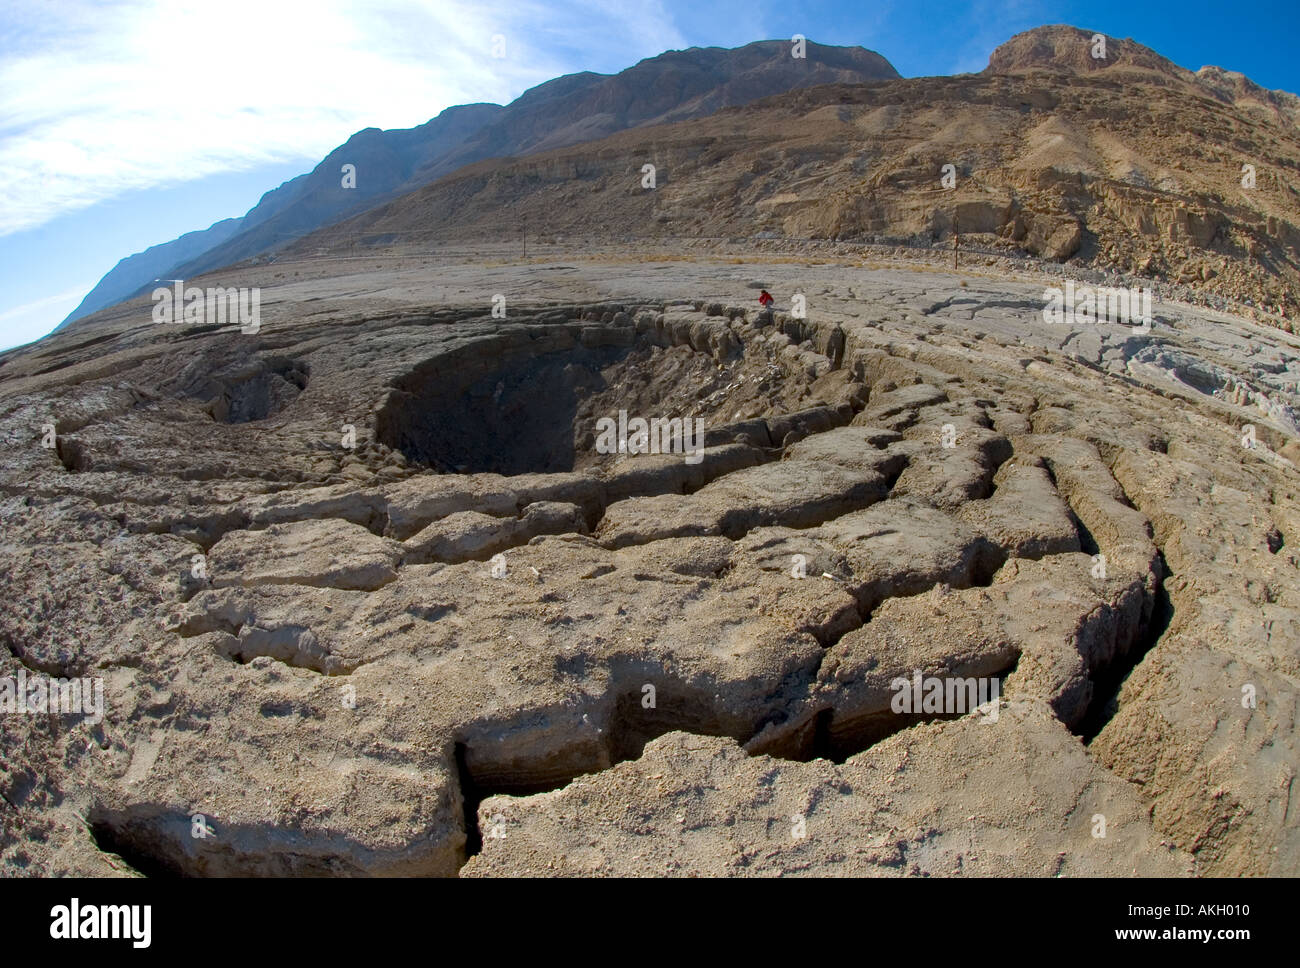 Israel Dead Sea Sink Holes Natural Phenomenon Due To The